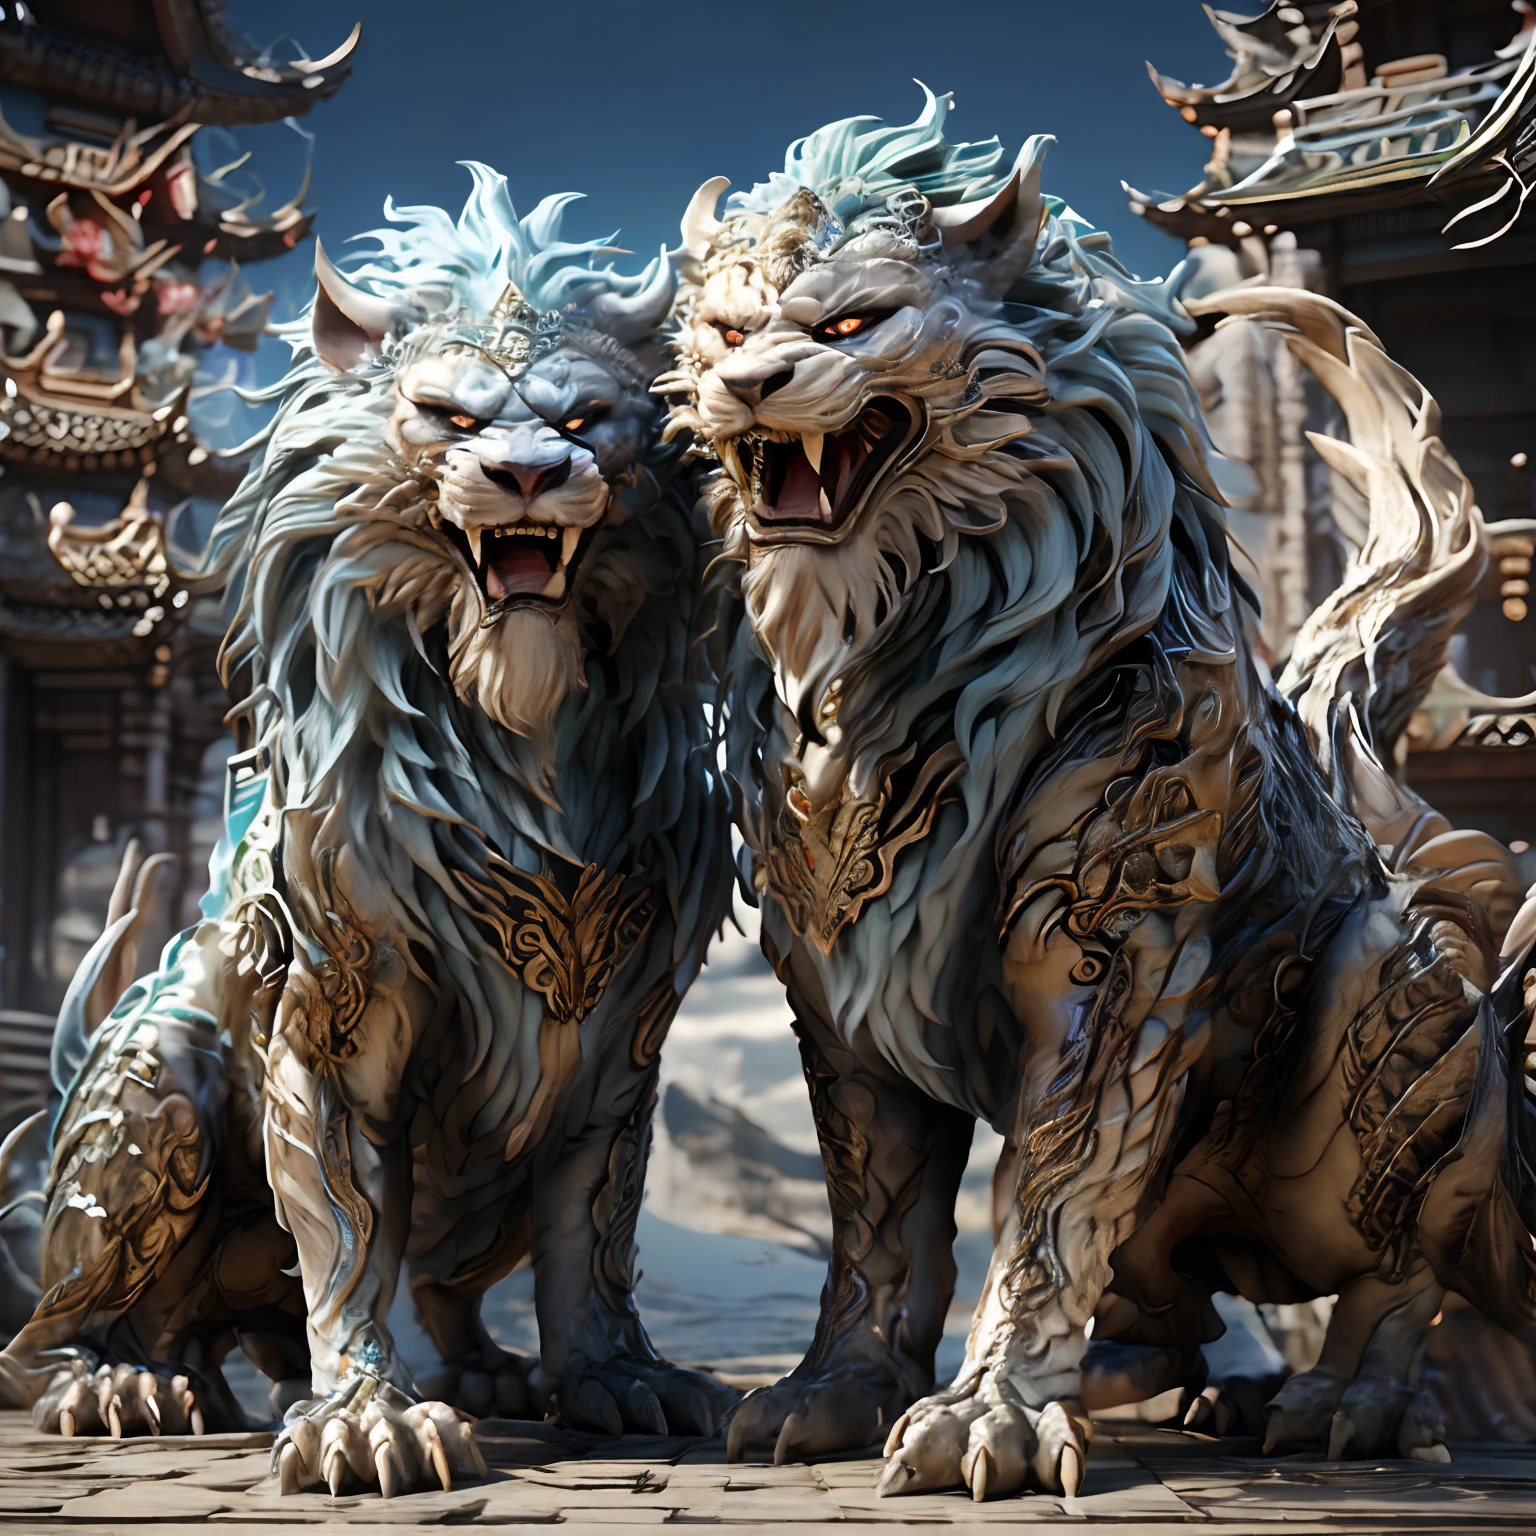 Casal Foo dog, at the entrance of a temple，ultra hd image。